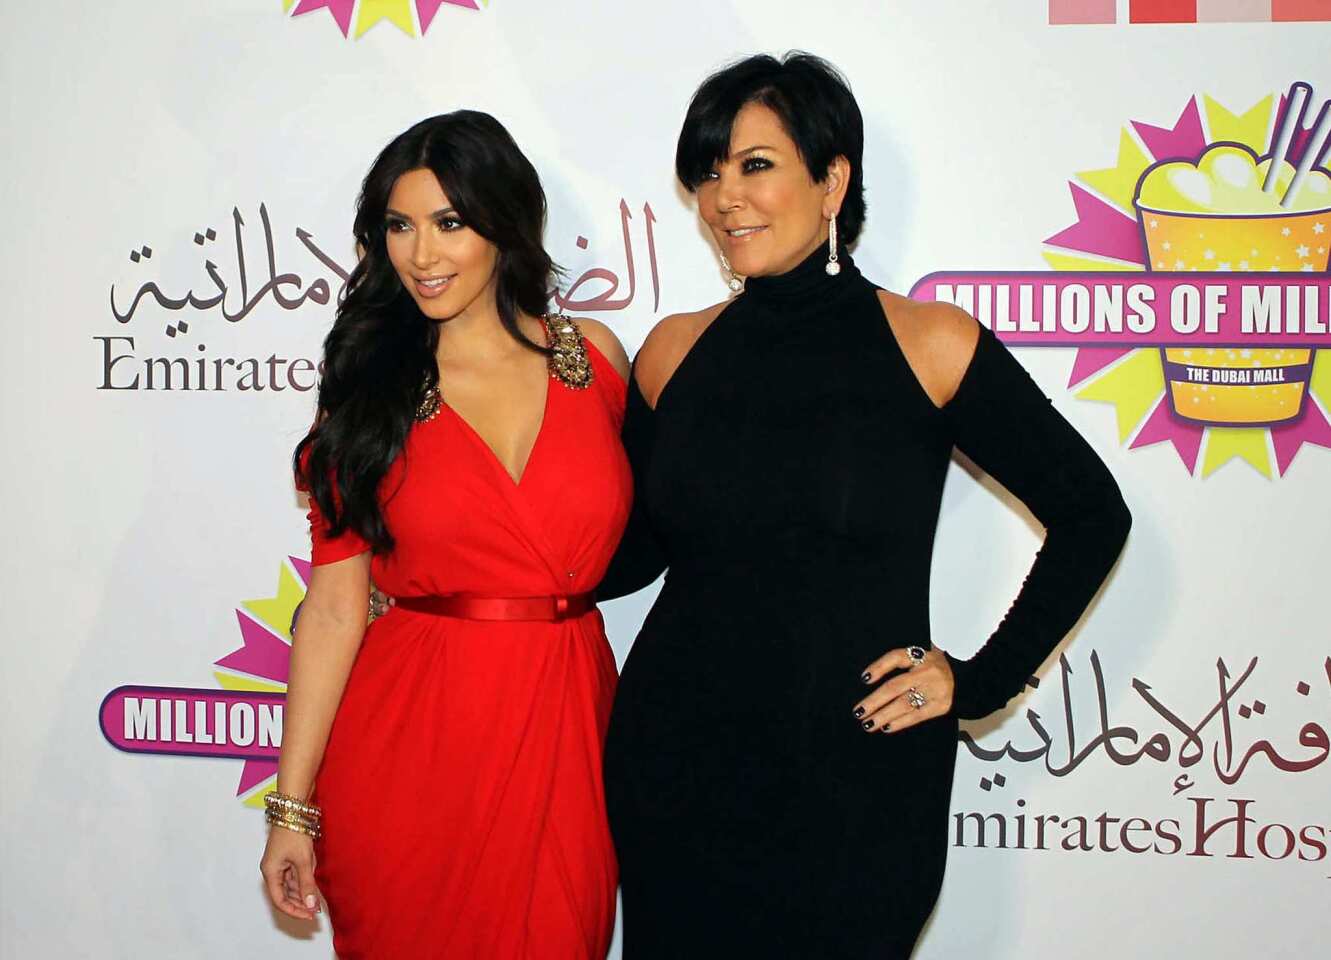 Kim Kardashian, above left, doesn't want her divorce drama turned into reality TV fodder, but "Saturday Night Live" went ahead and did it anyway. The sketch comedy show spoofed the starlet's E! wedding special with a skit called "Kim's Fairytale Divorce," featuring a lavish split scenario in which she signs her divorce papers while handing Kris Humphries a few bucks and some change. Kristen Wiig steals the show as matriarch Kris Jenner, above right, while "It's Always Sunny in Philadelphia" star and host Charlie Day serves as the divorce attorney.